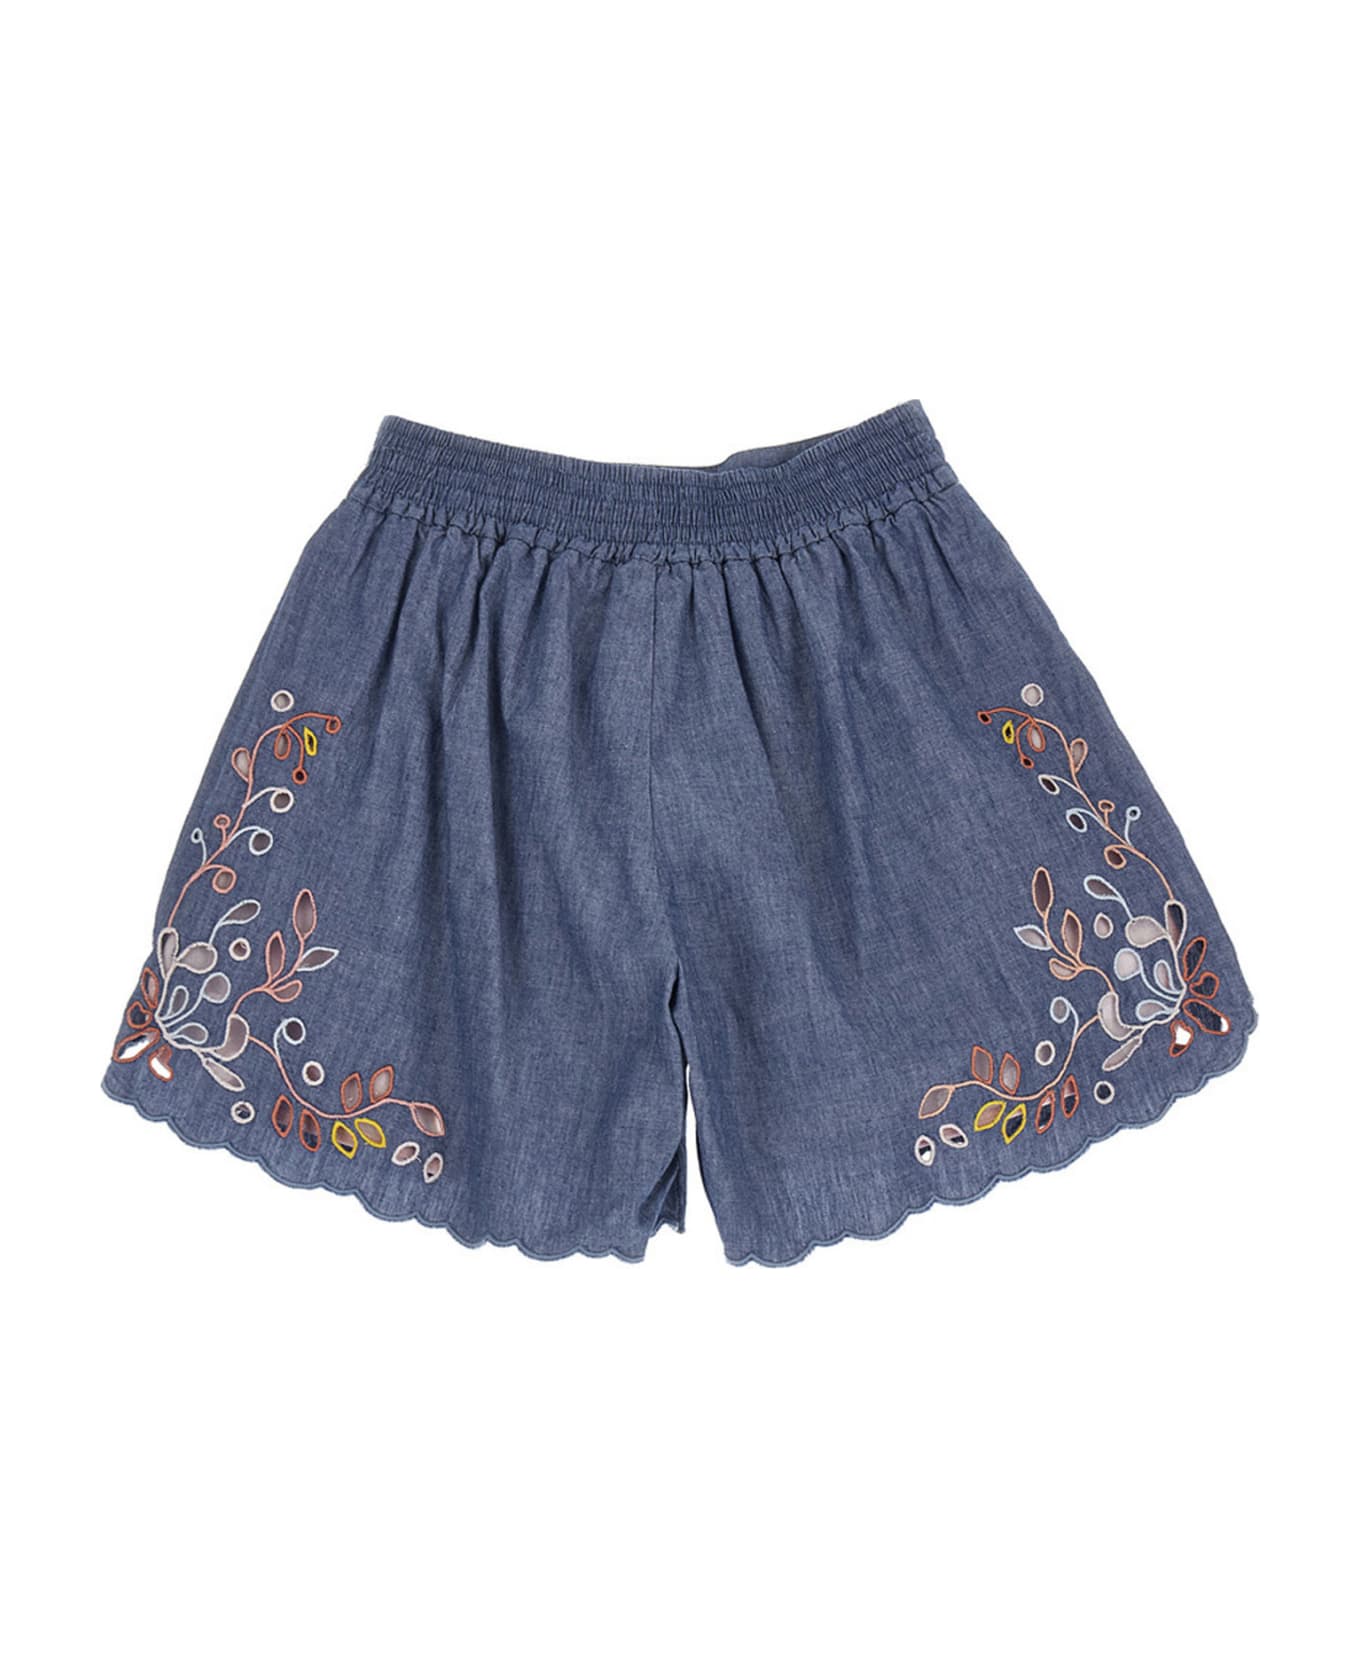 Chloé Embroidery Chamb Ray Shorts - Light Blue ボトムス